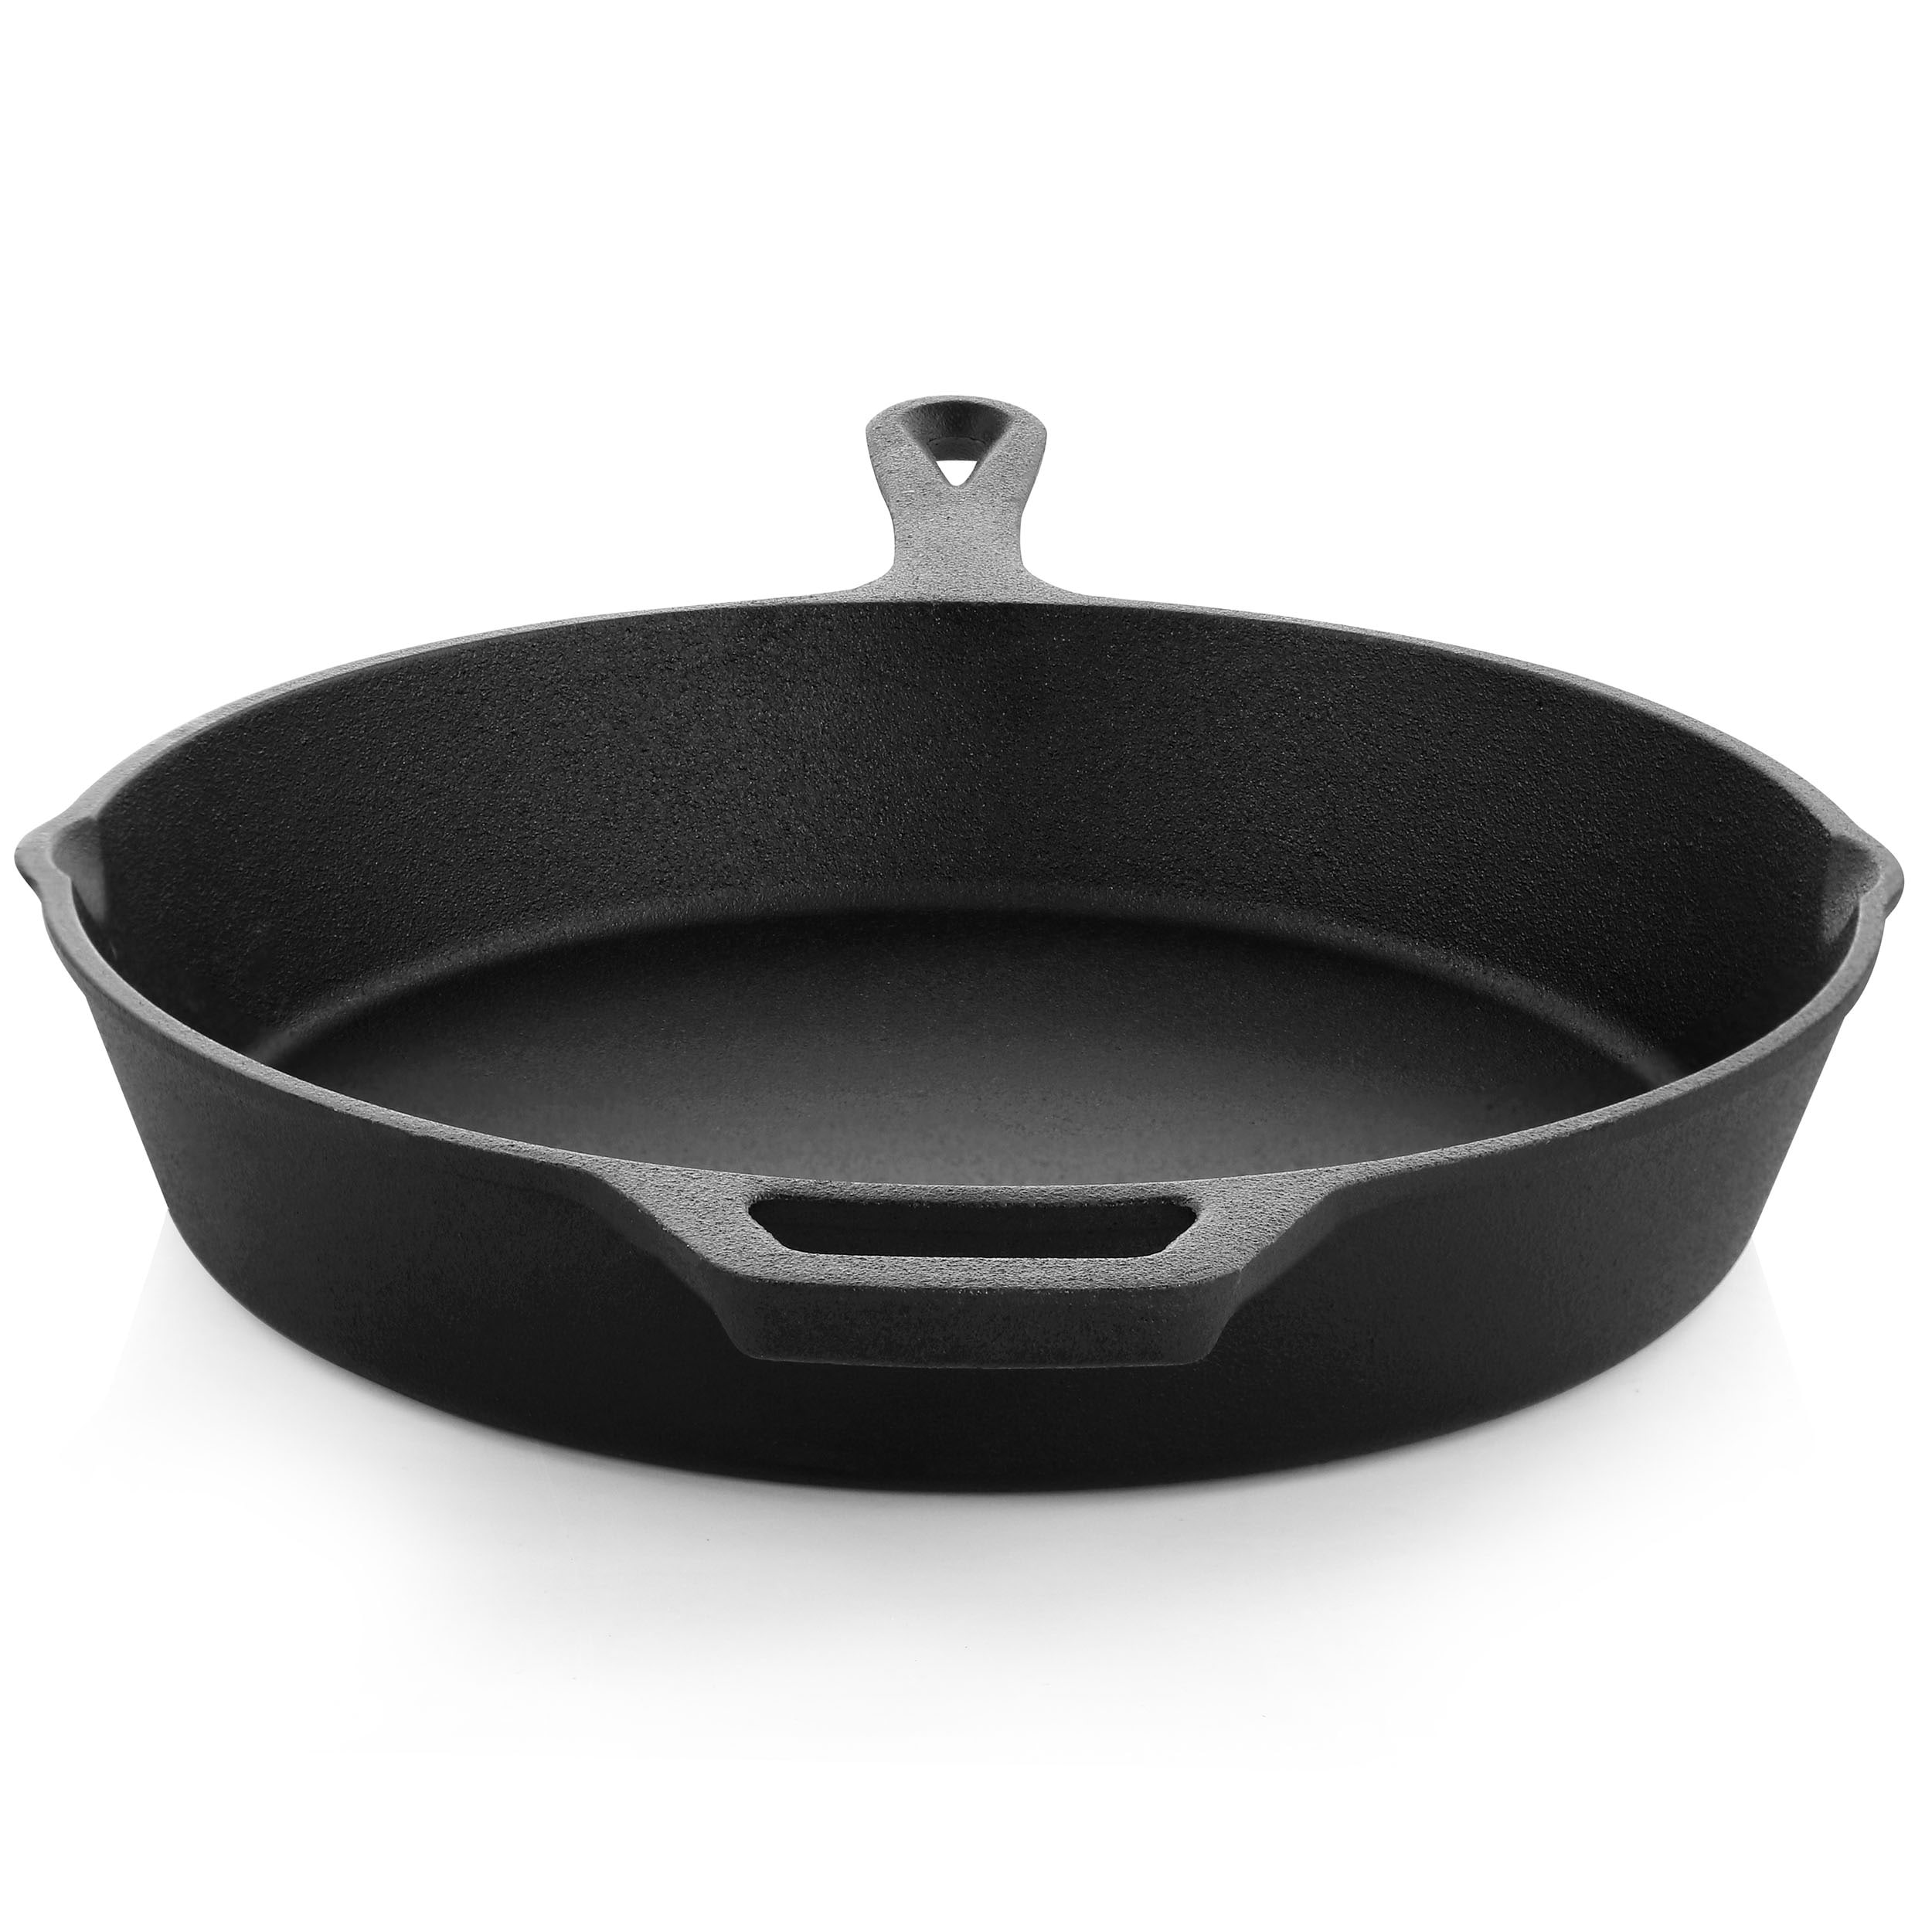 https://ak1.ostkcdn.com/images/products/is/images/direct/2c9df824978bd133ac648d9a27d6a9024caf8aaf/MegaChef-10-Inch-Round-Preseasoned-Cast-Iron-Frying-Pan-with-Handle-in-Black.jpg